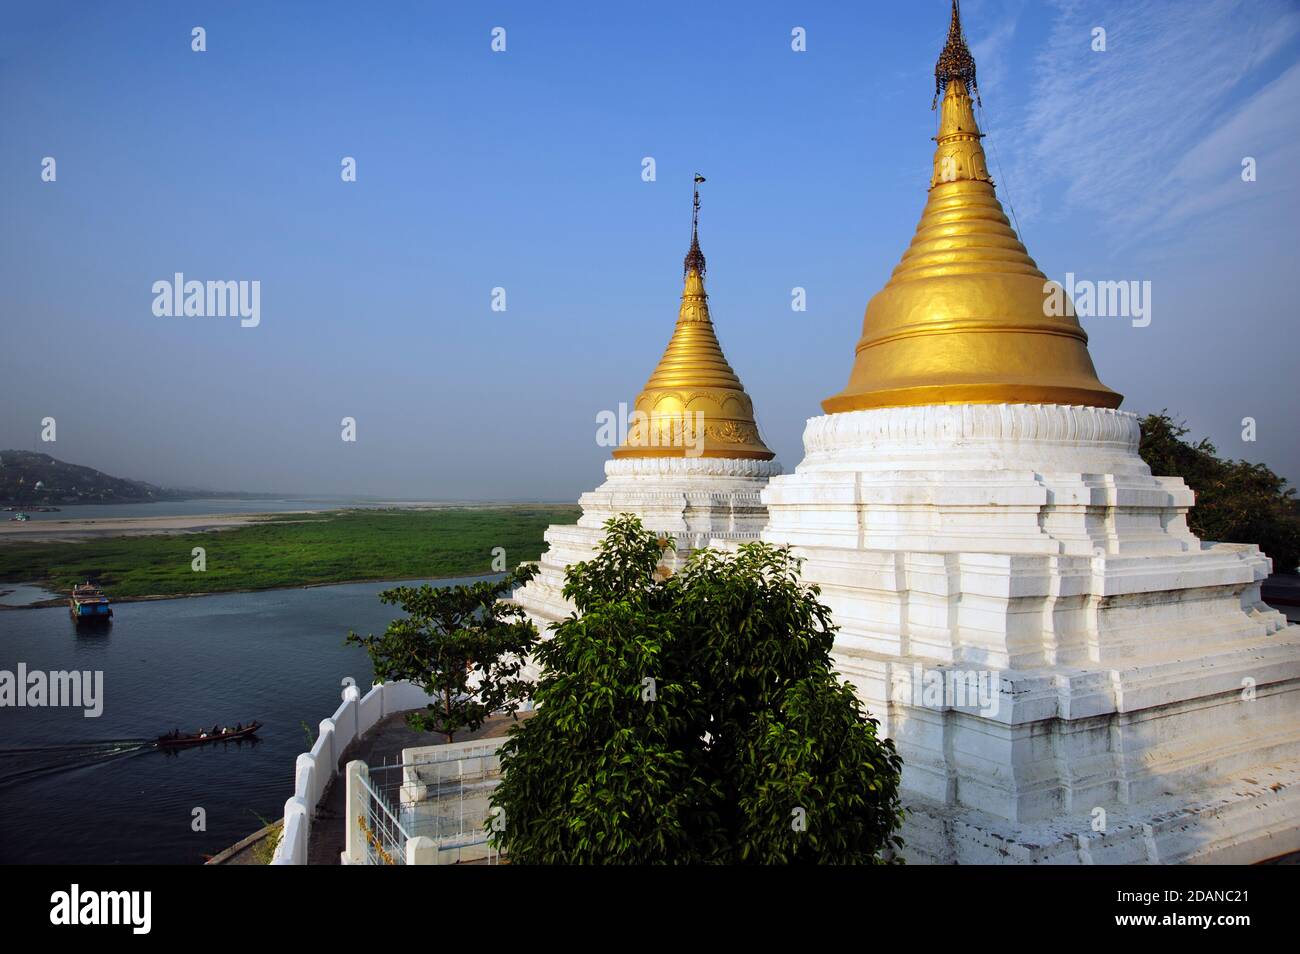 A Burmese boat passes Two gold topped Burmese temple stupas on the banks of the Ayeyarwady river looking across to Sagaing near Mandalay Myanmar Stock Photo